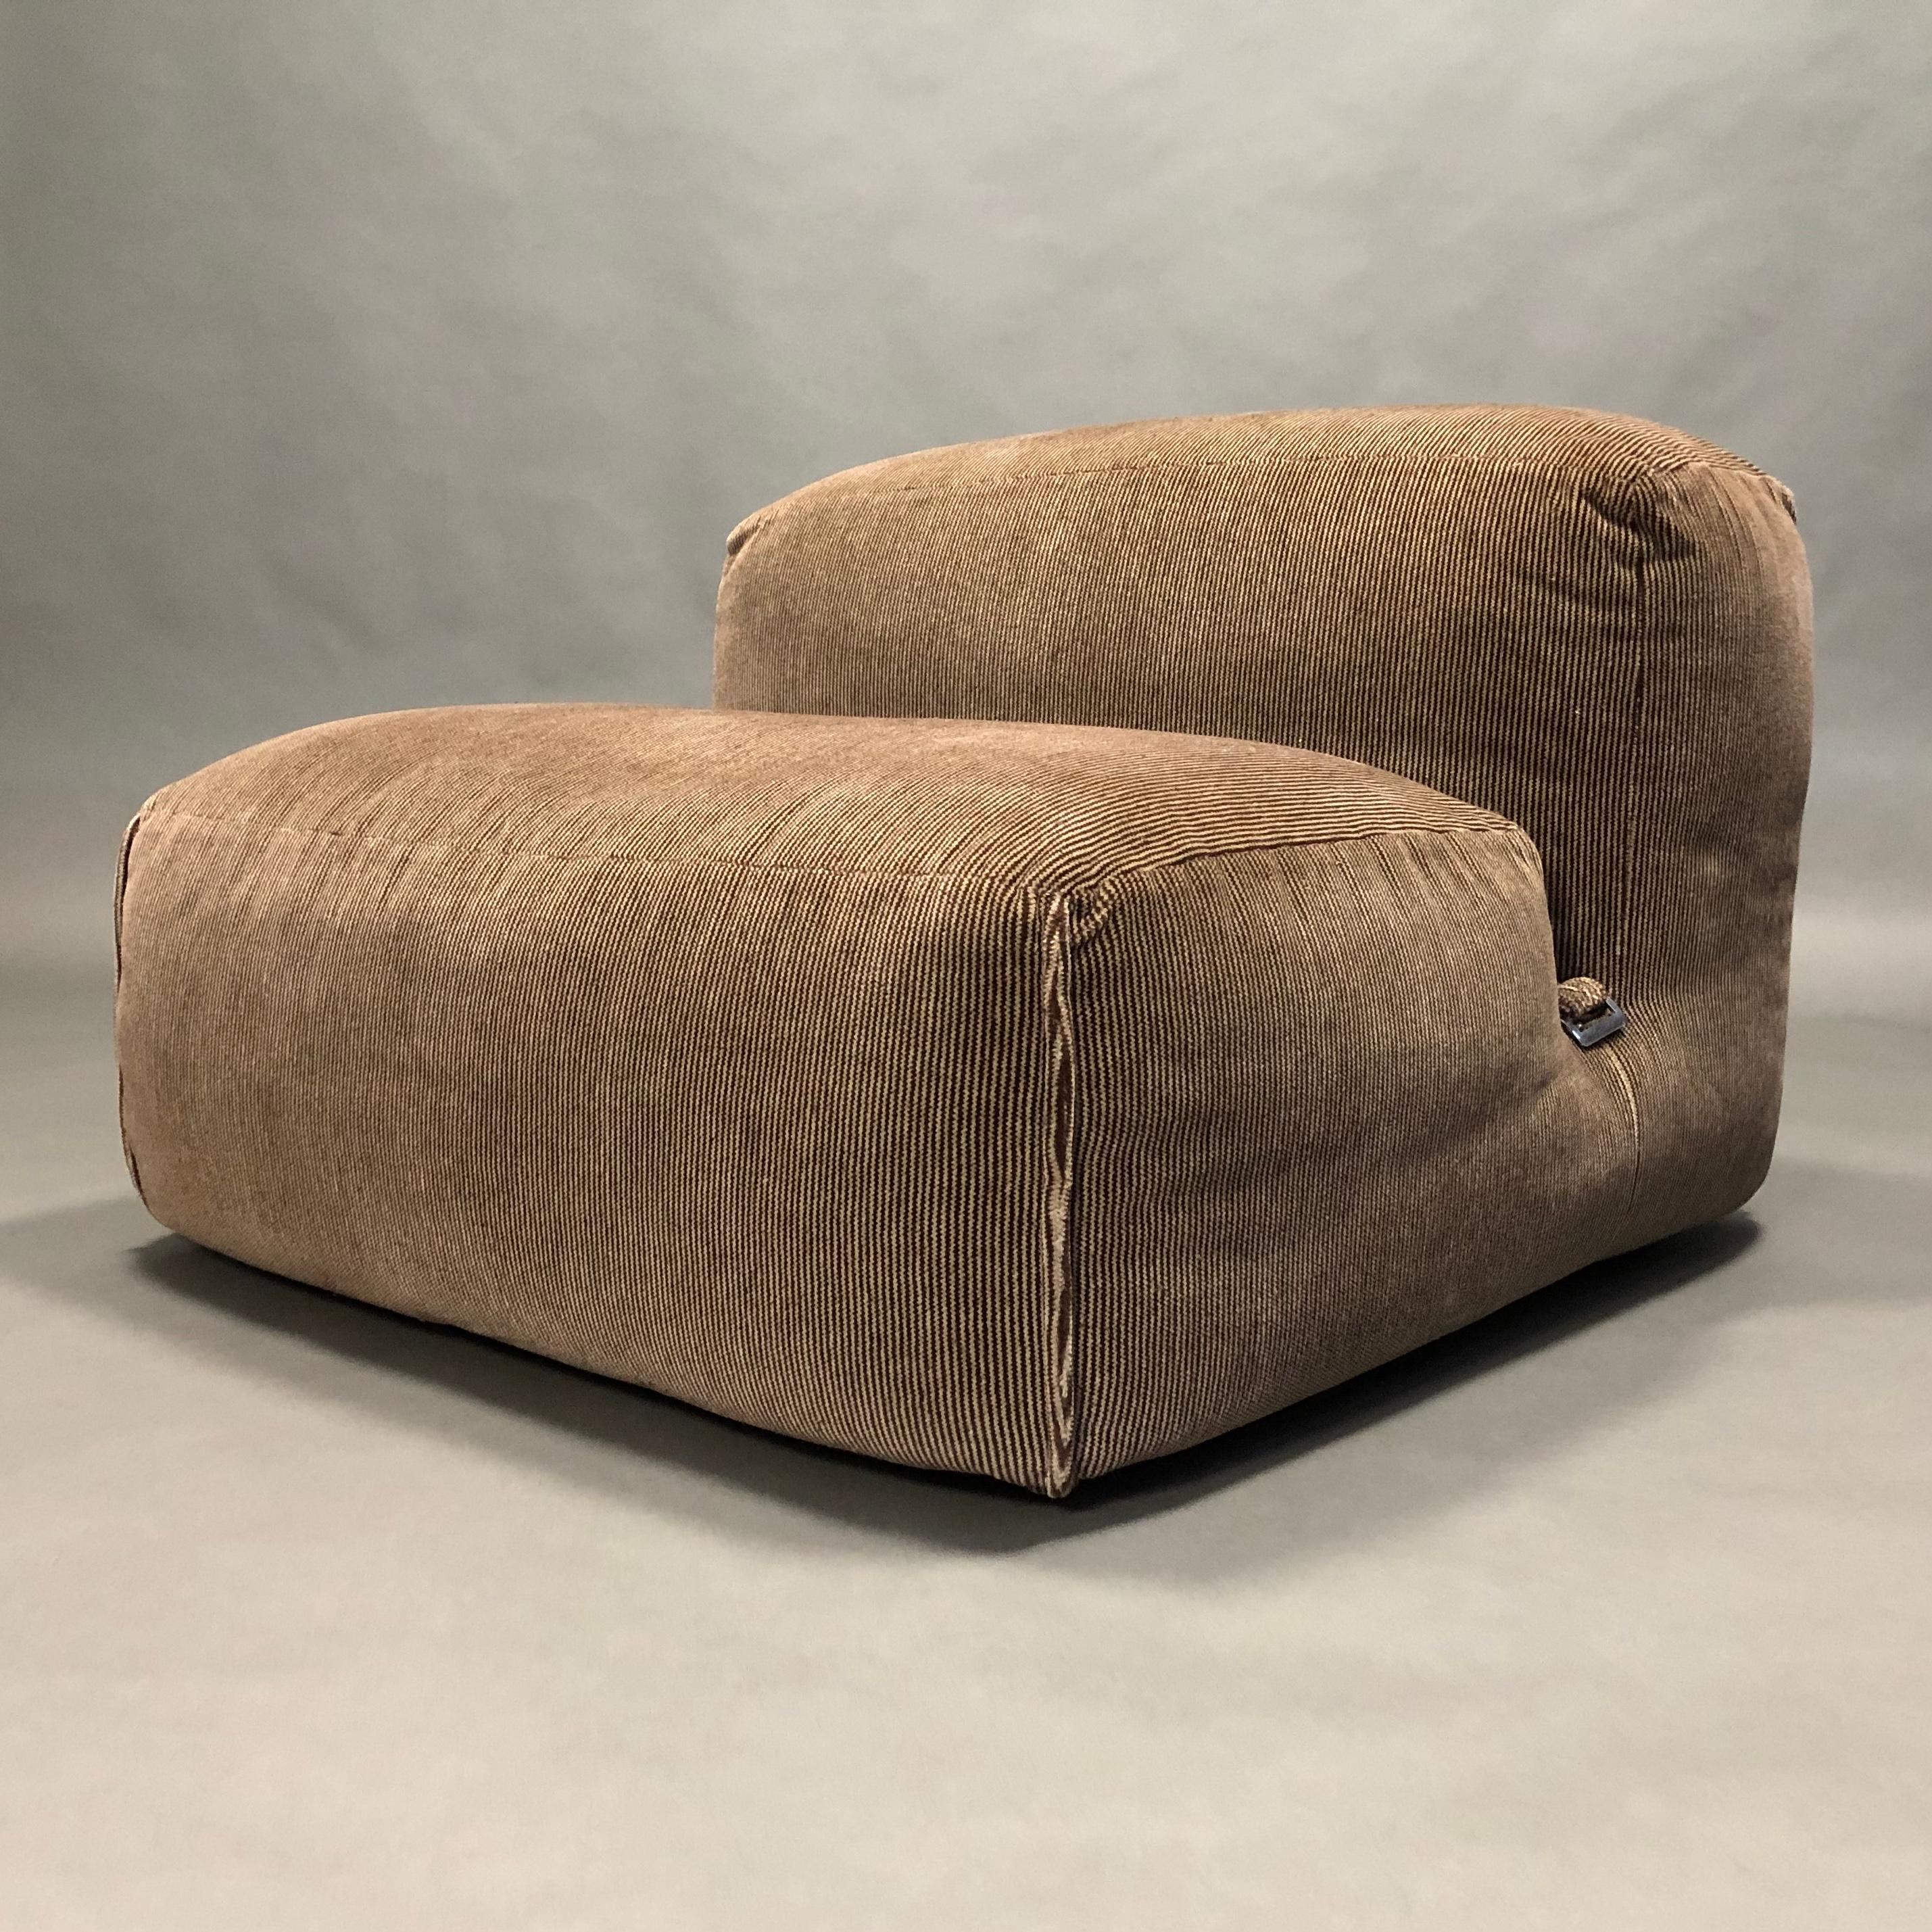 Exceptional and extremely rare Le Mura lounge chair by Mario Bellini for Cassina, Italy, 1970s. We have two pieces available which also can be attached to each other to use as a sofa.
It is similar to the Camaleonda by Mario Bellini, but the Le Mura